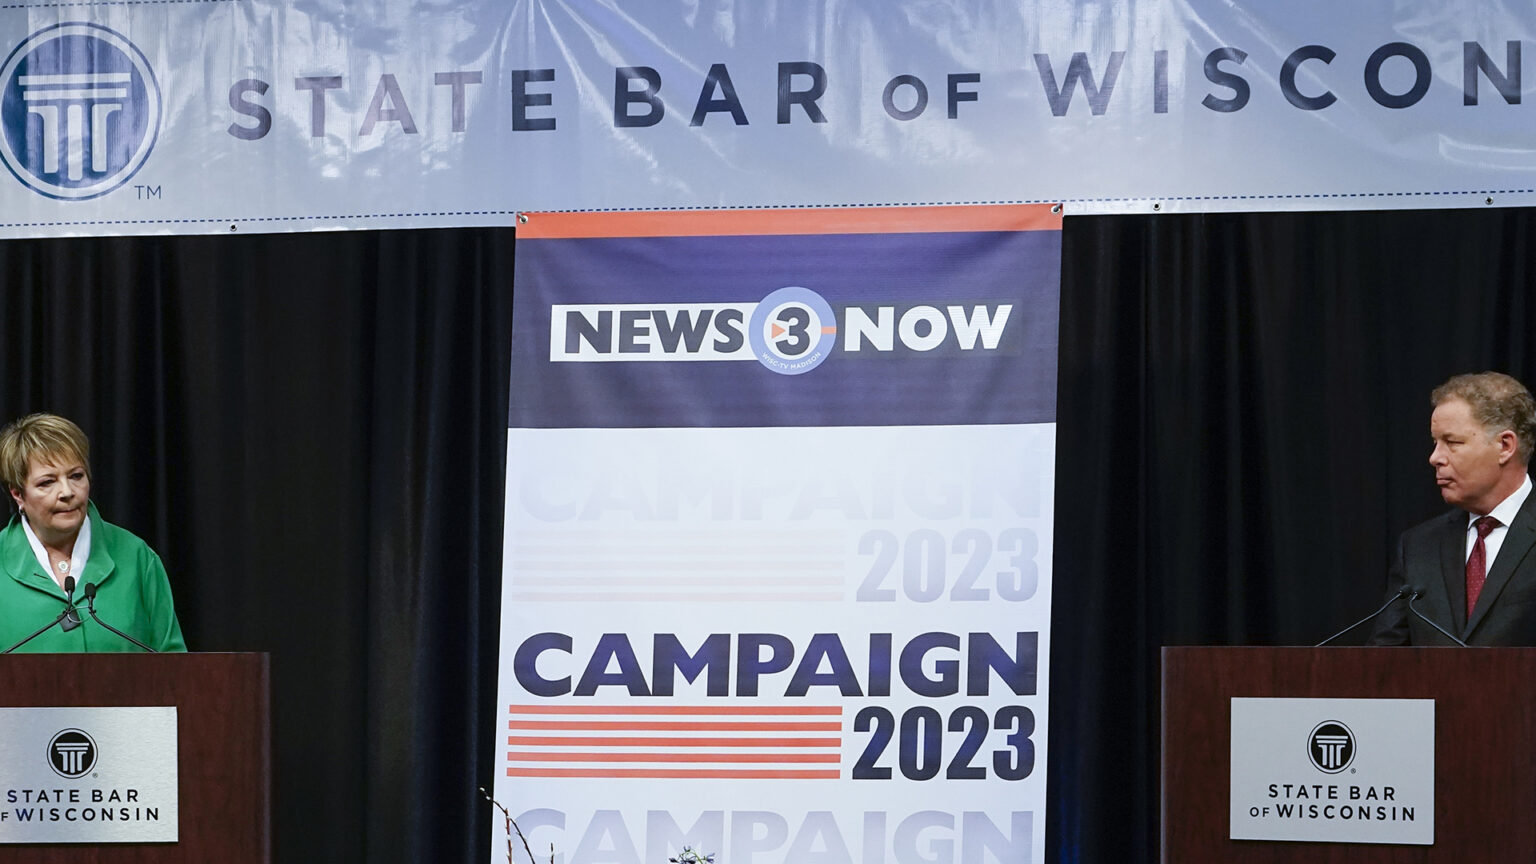 Janet Protasiewicz and Daniel Kelly stand behind podiums with microphones and labels reading State Bar of Wisconsin, with a stage curtain, horizontal banner reading State Bar of Wisconsin and vertical banner reading News 3 Now and Campaign 2023 in the background.